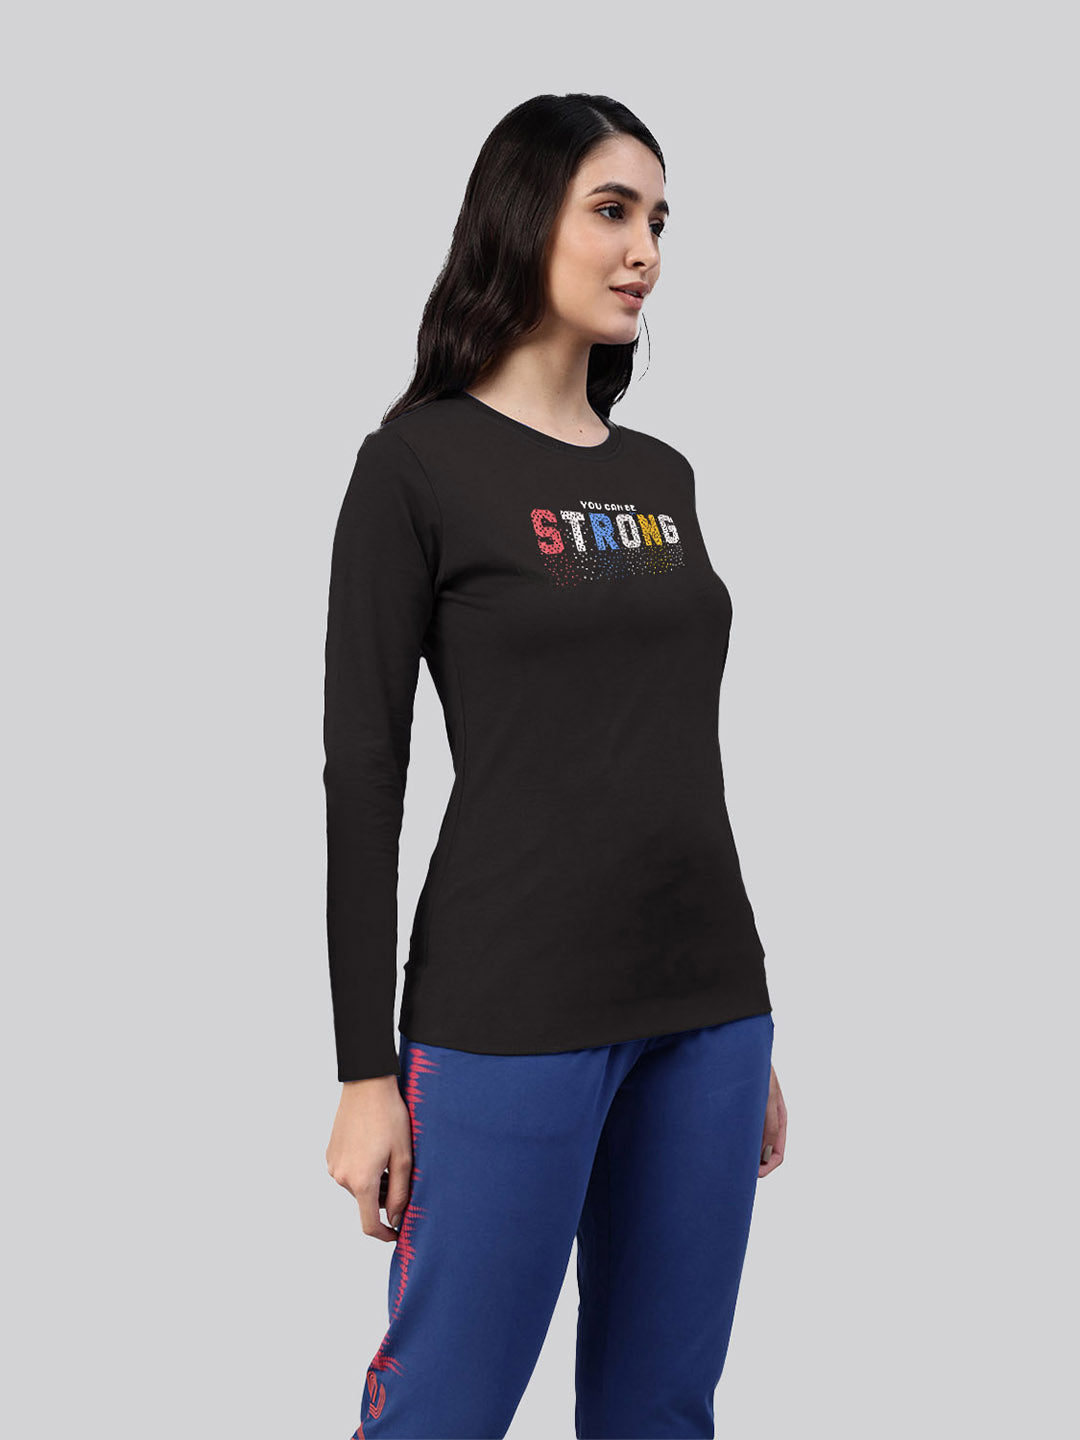 Black printed round neck full sleeve t-shirt for ladies